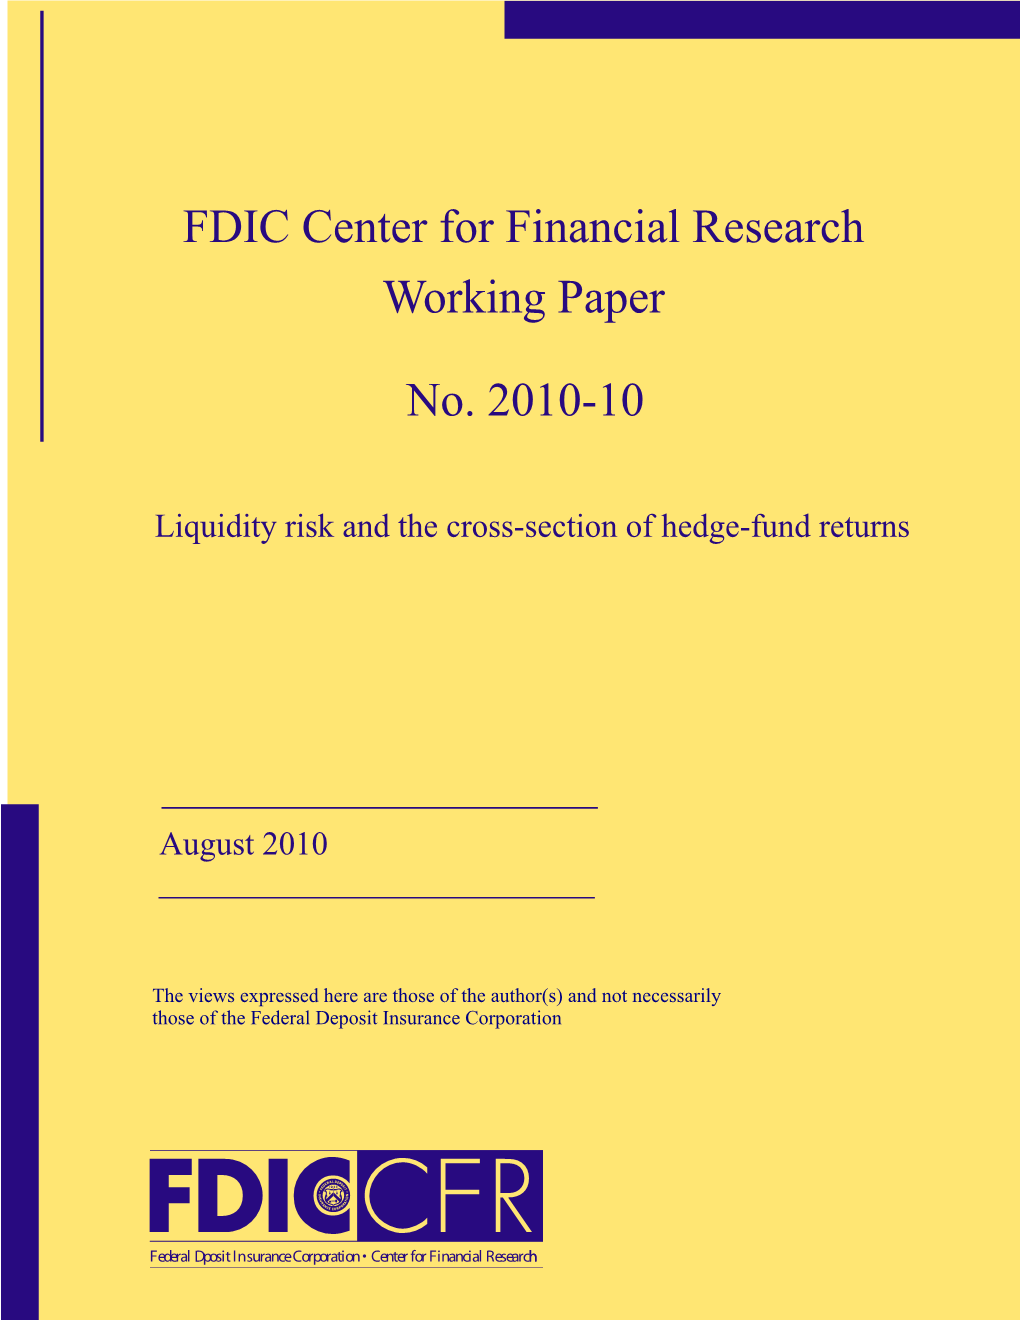 Liquidity Risk and the Cross-Section of Hedge-Fund Returns